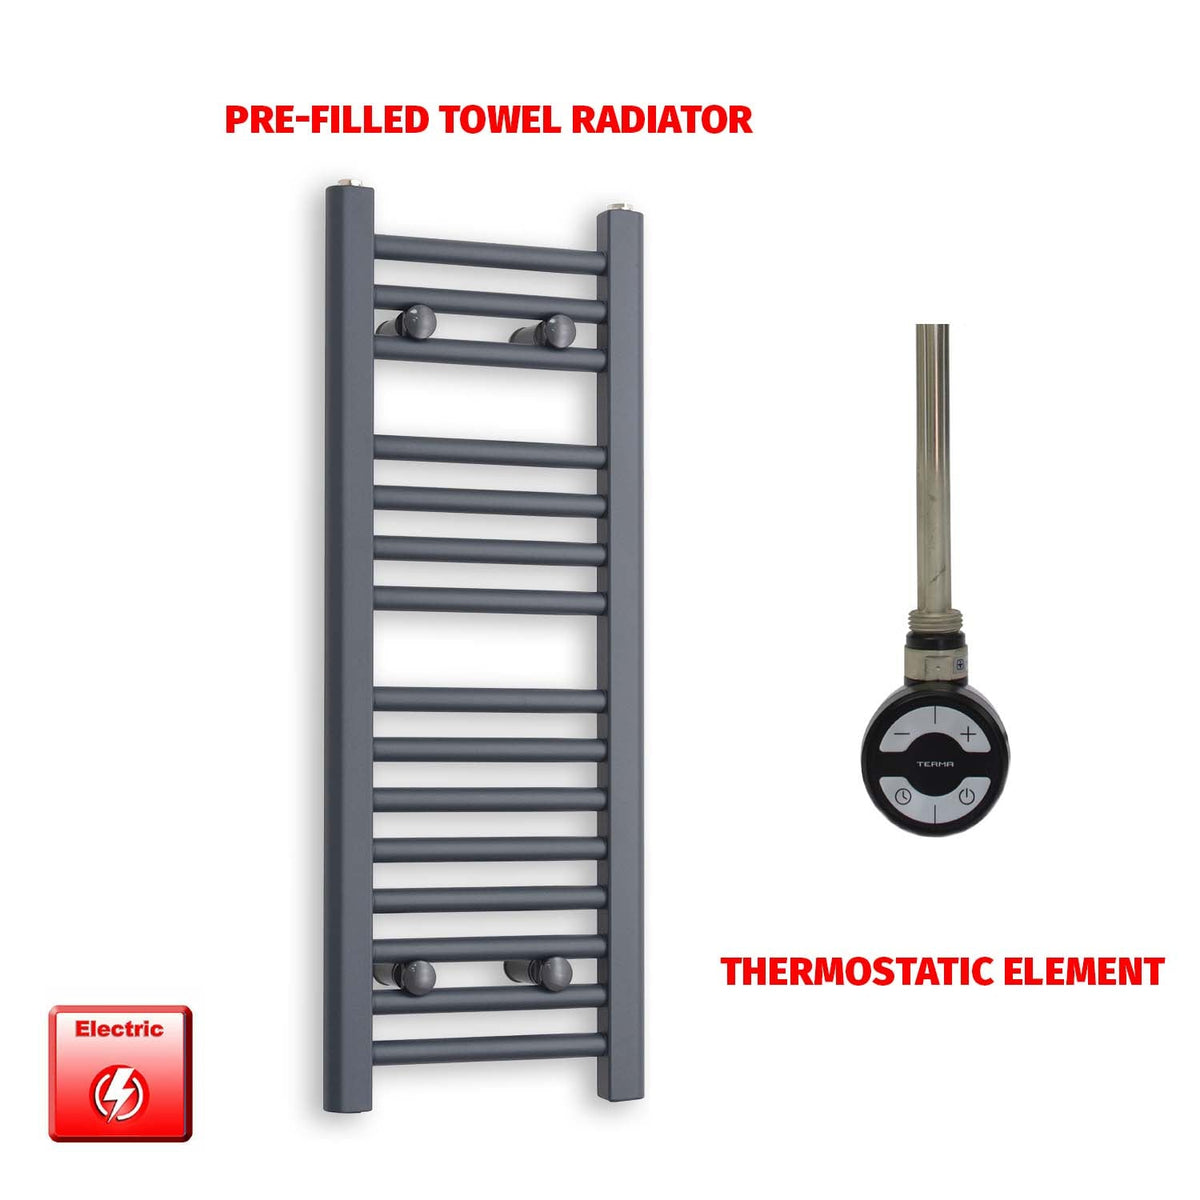 800mm High 300mm Wide Flat Anthracite Pre-Filled Electric Heated Towel Rail Radiator HTR MOA Thermostatic element no timer